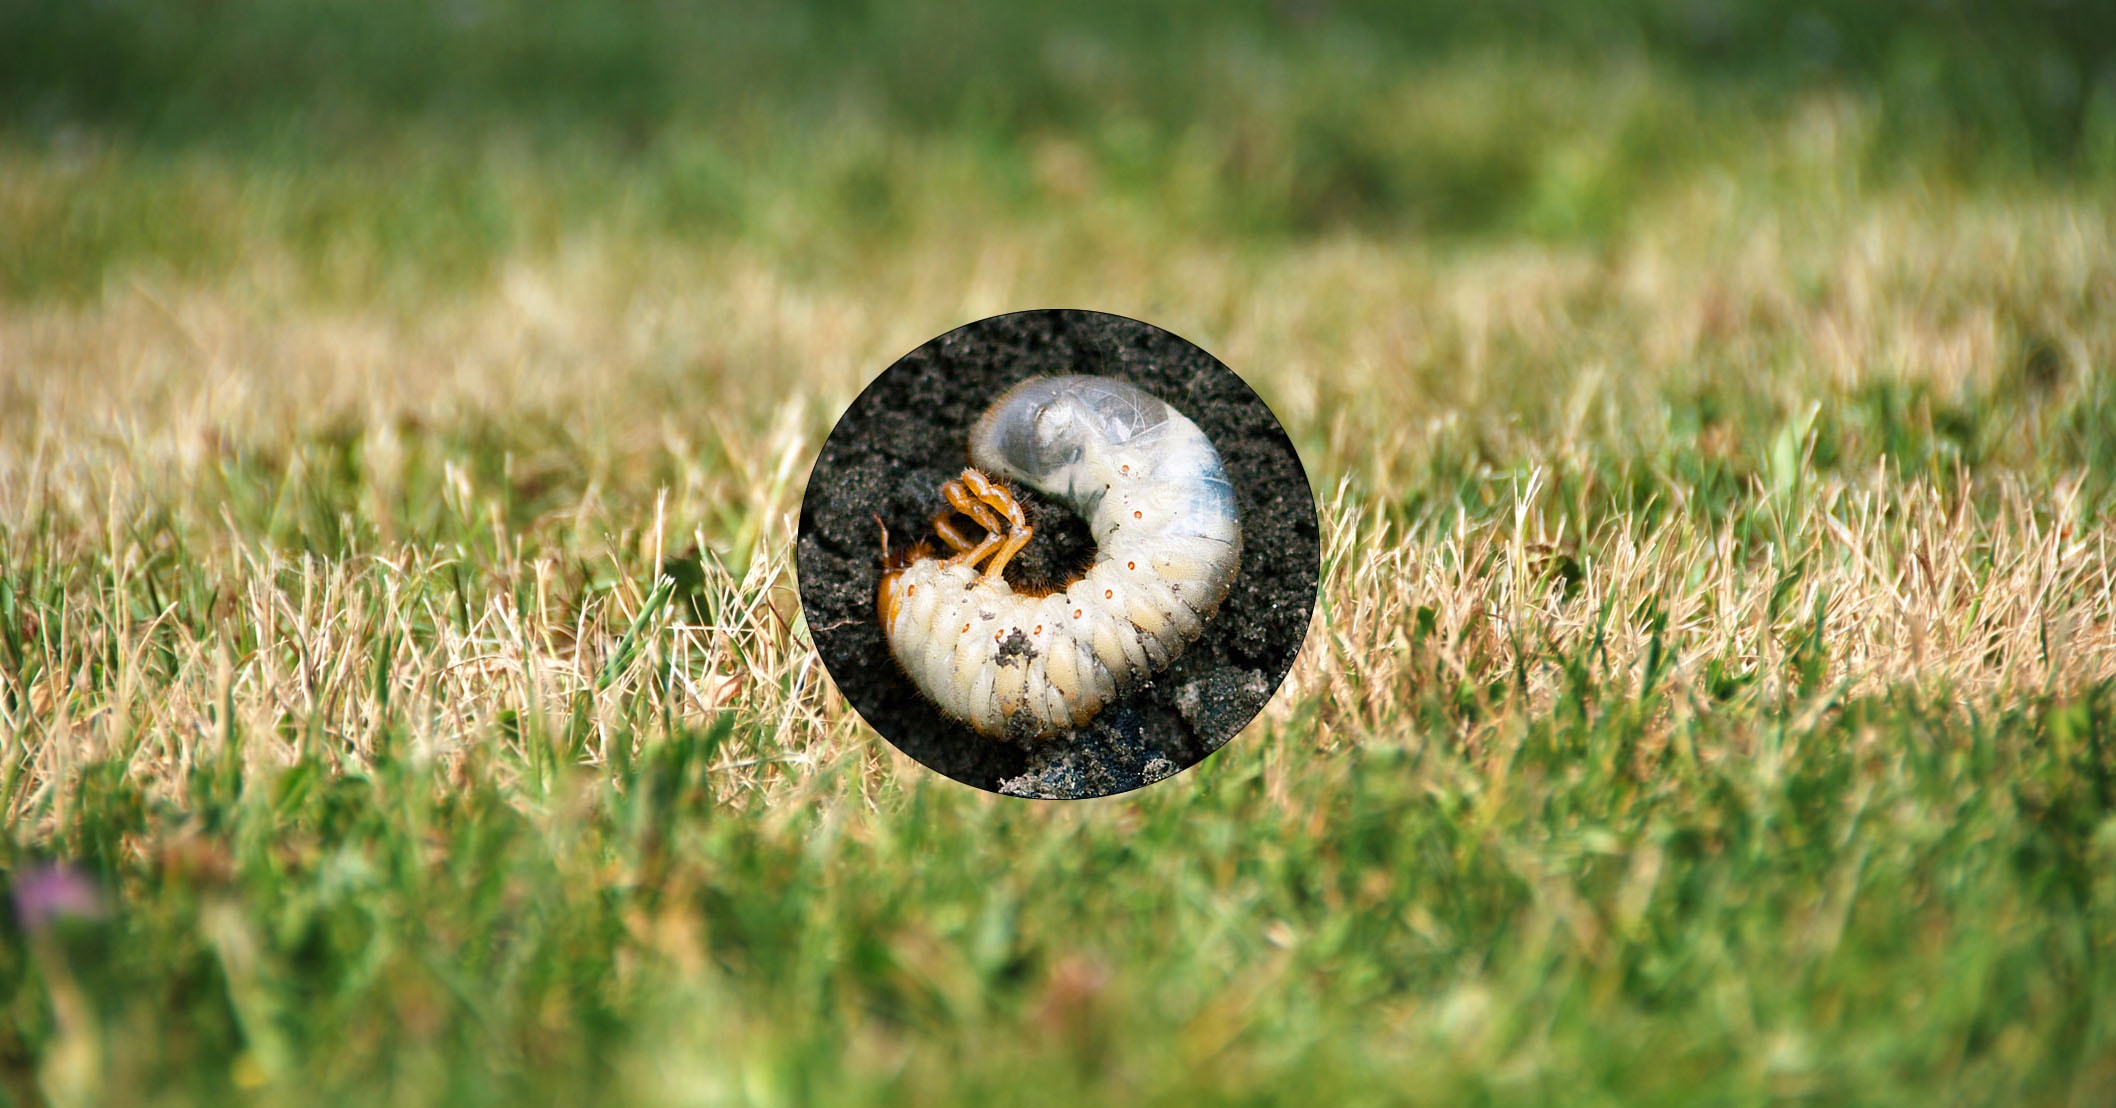 How to Control Lawn Grubs